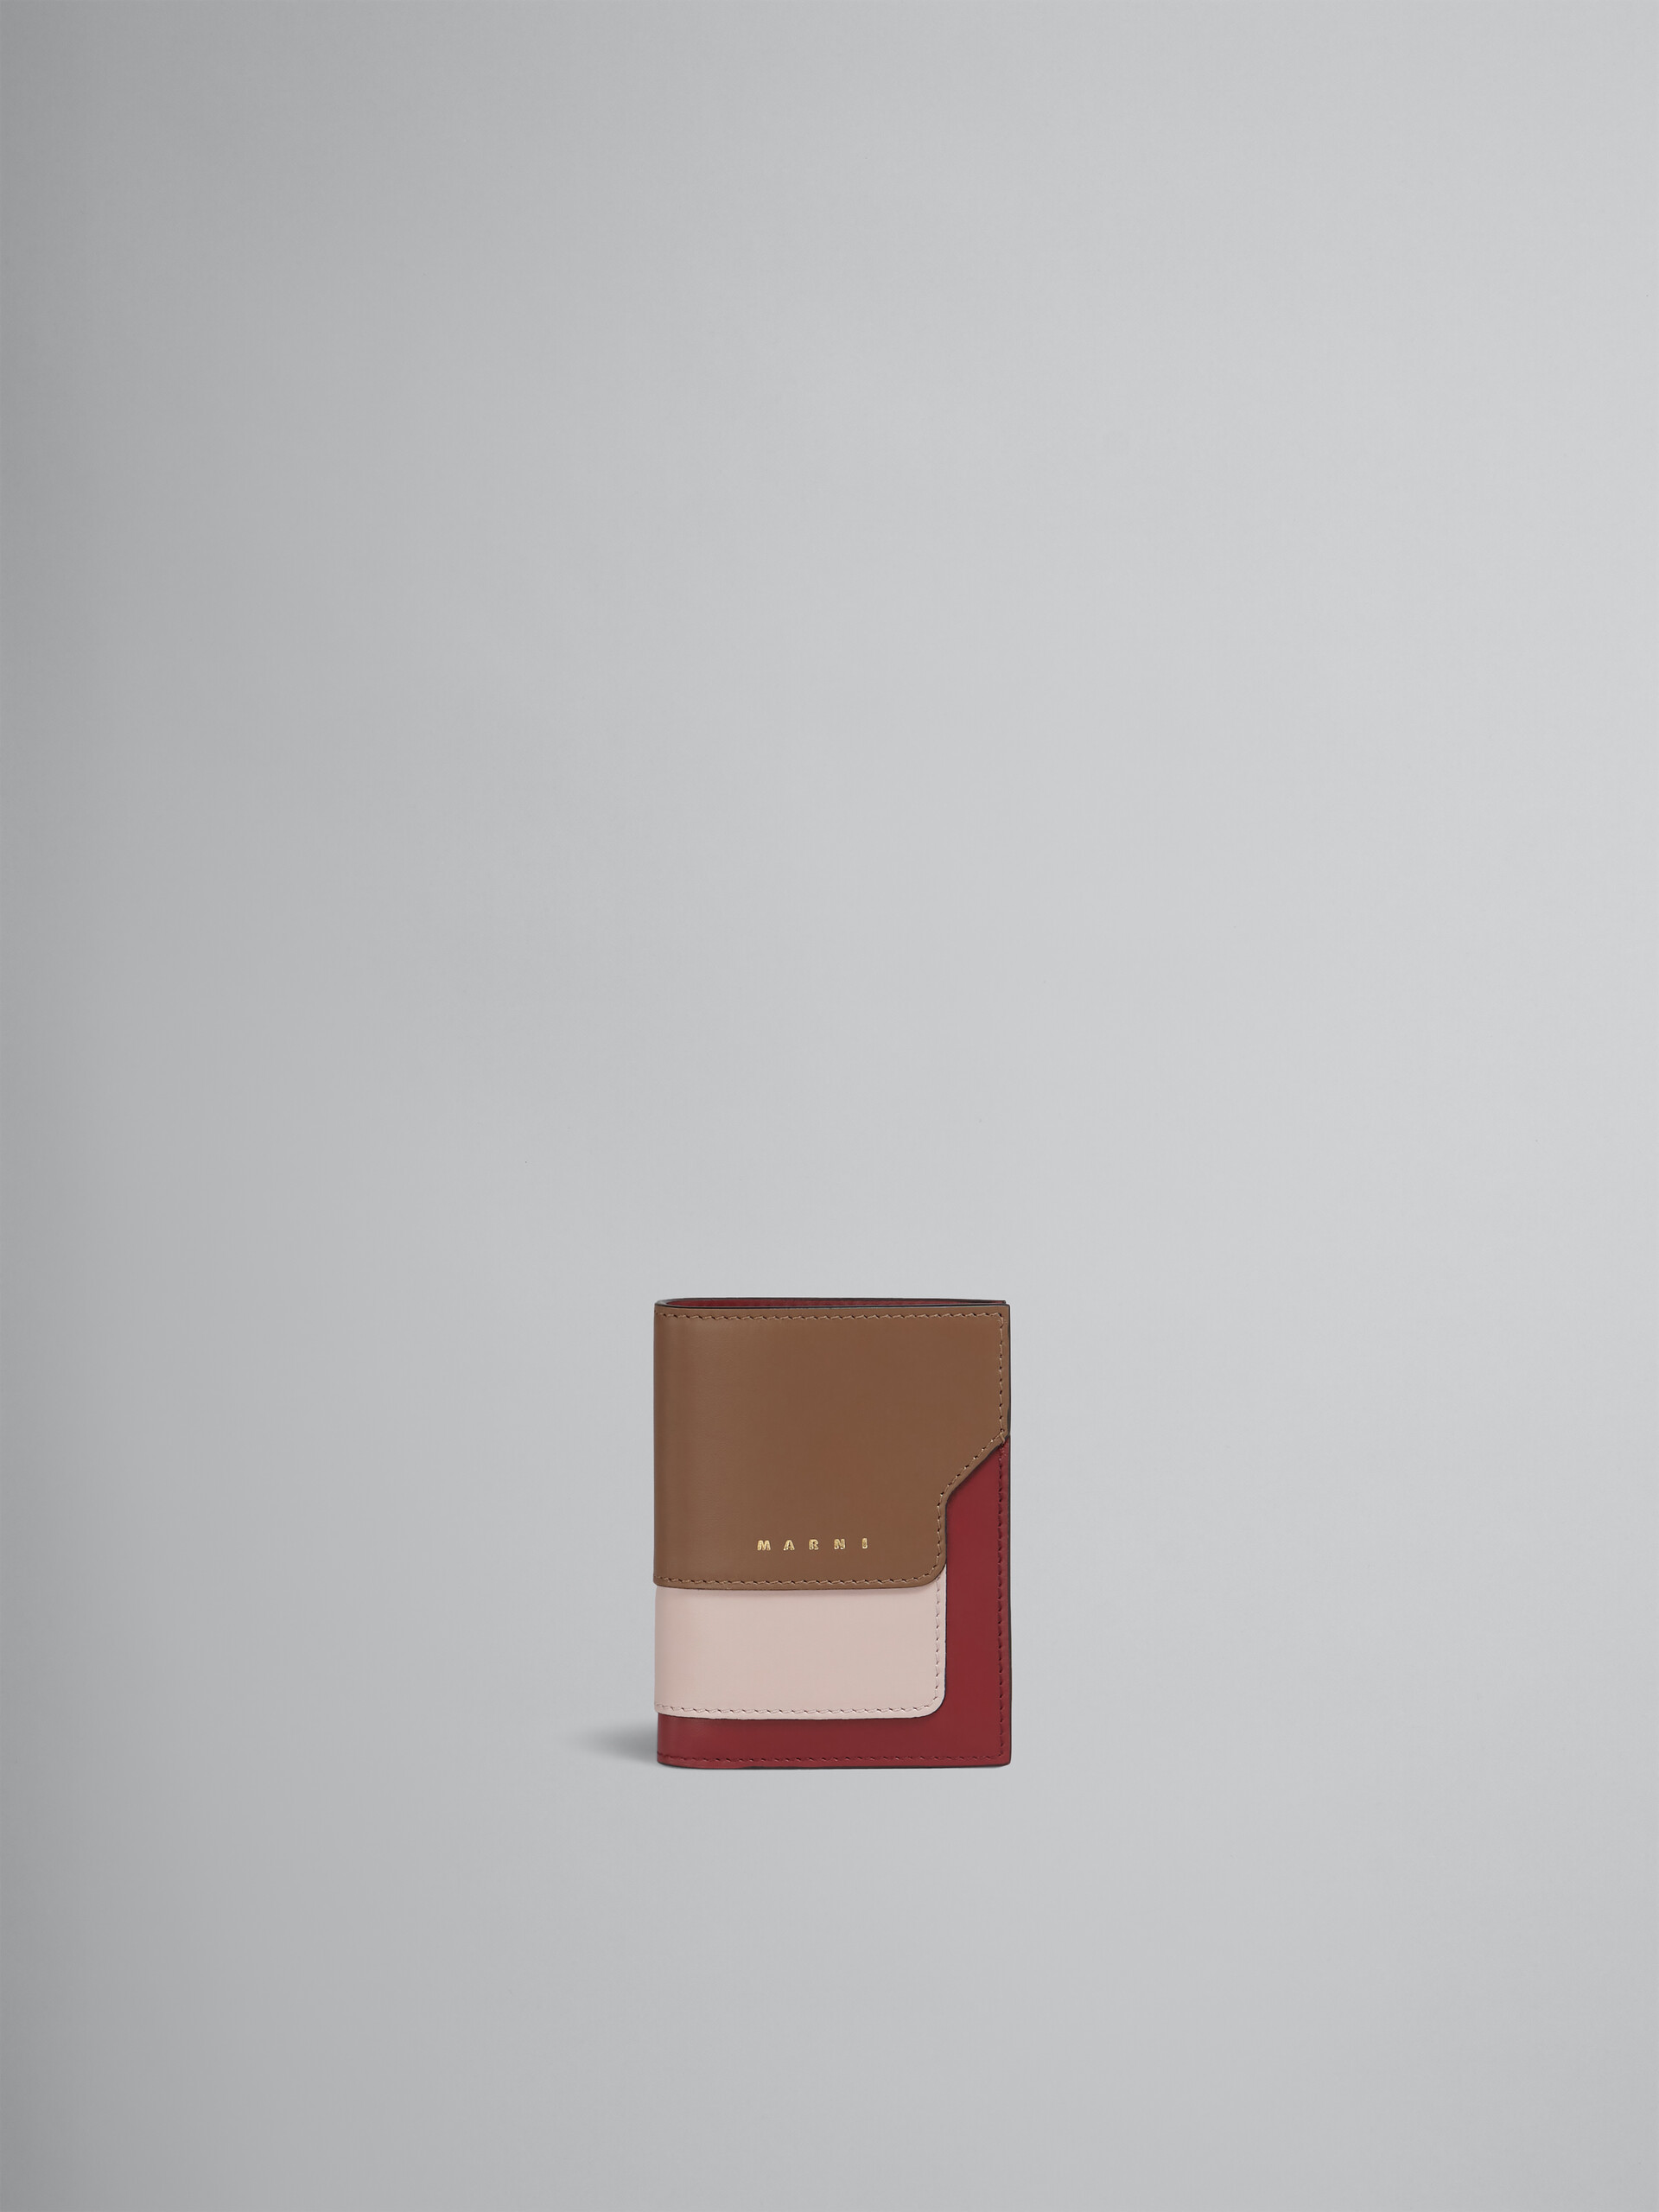 Bi-fold wallet in brown pink and burgundy saffiano leather - Wallets - Image 1